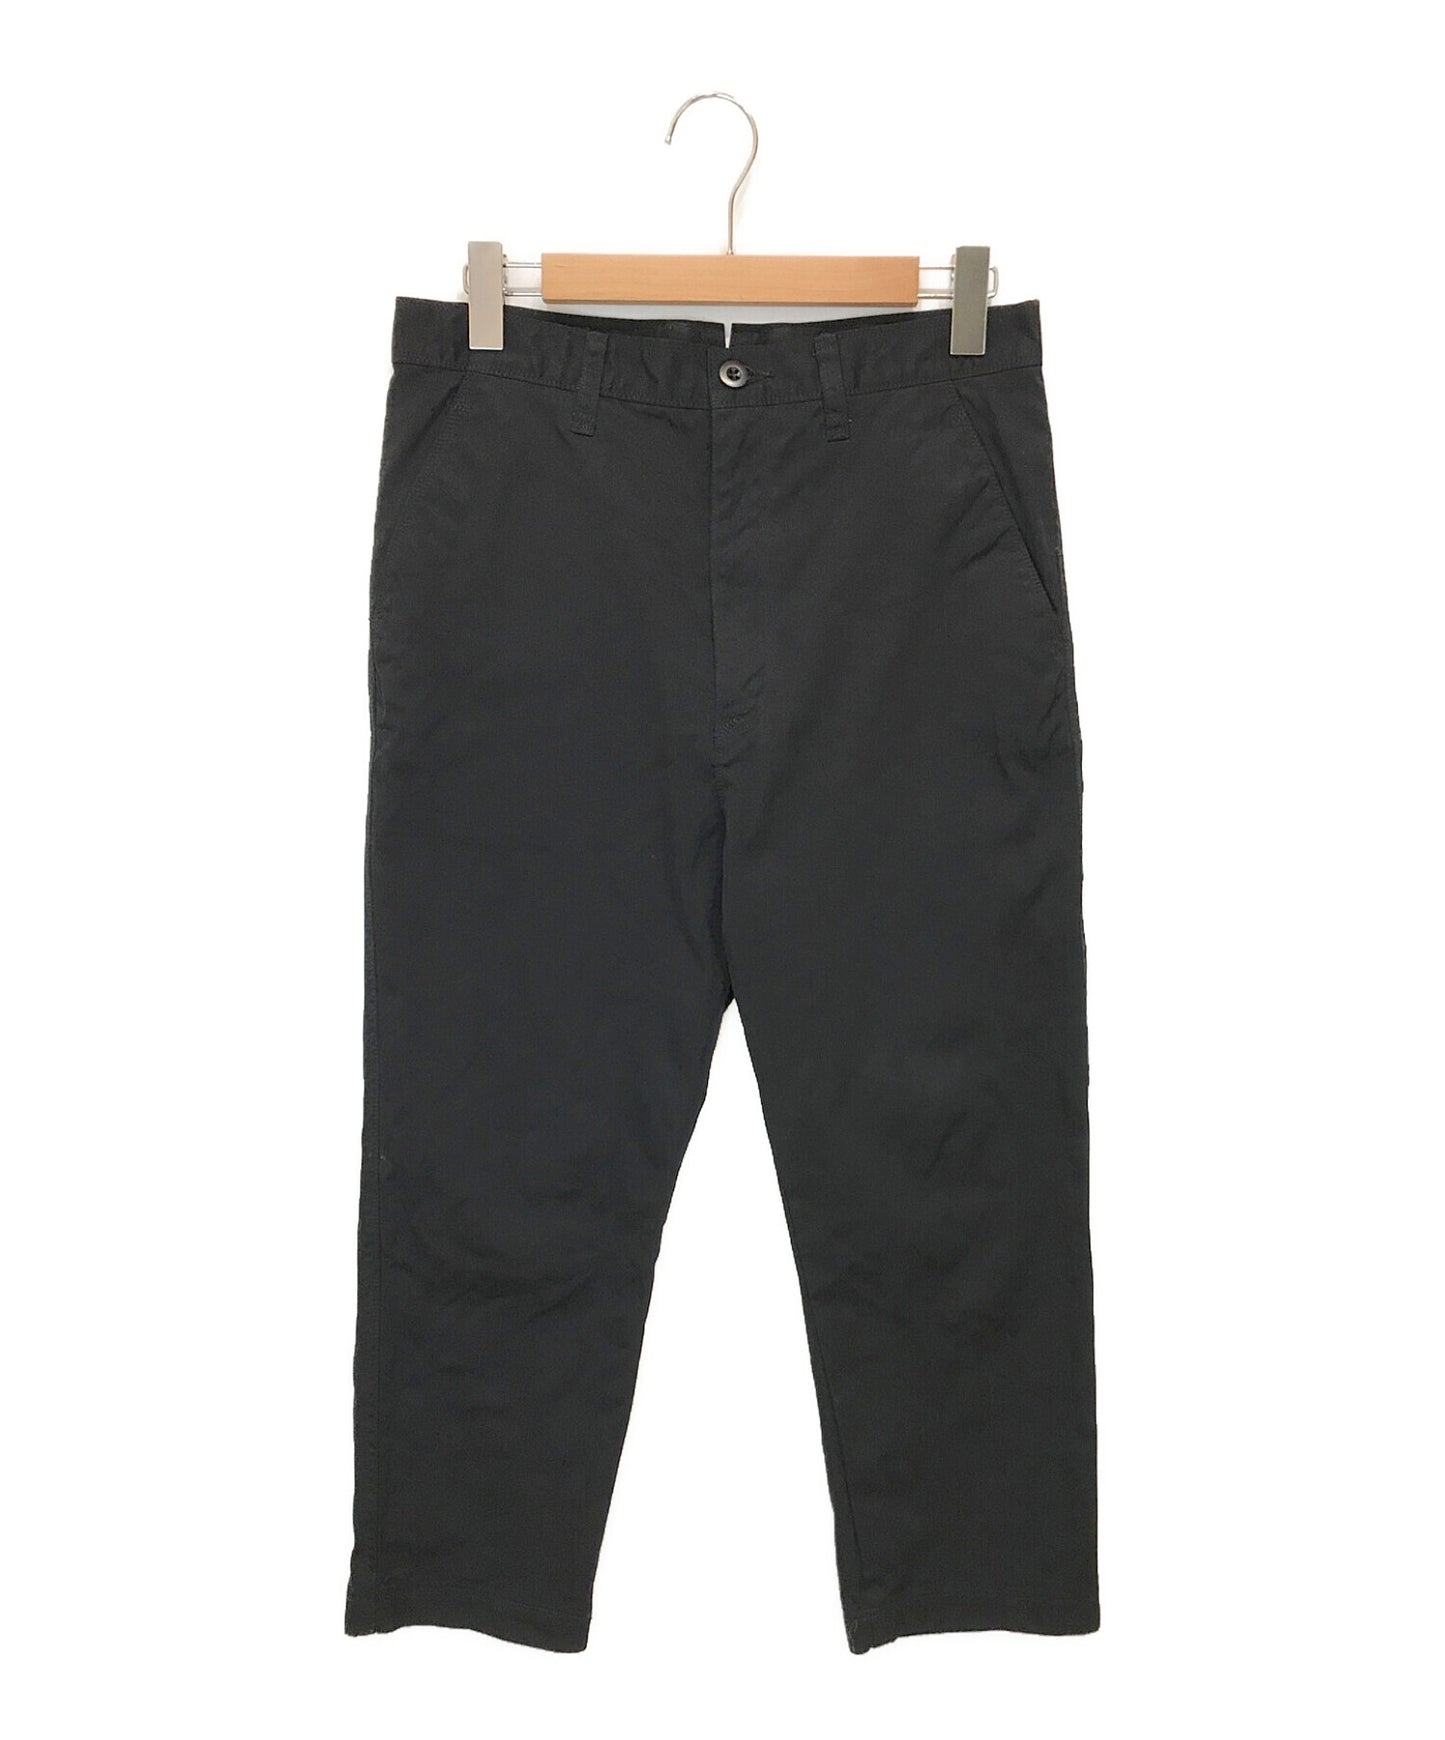 Junya Watanabe Comme des Garcons Nylon Twill Product Product Pants WG-P013